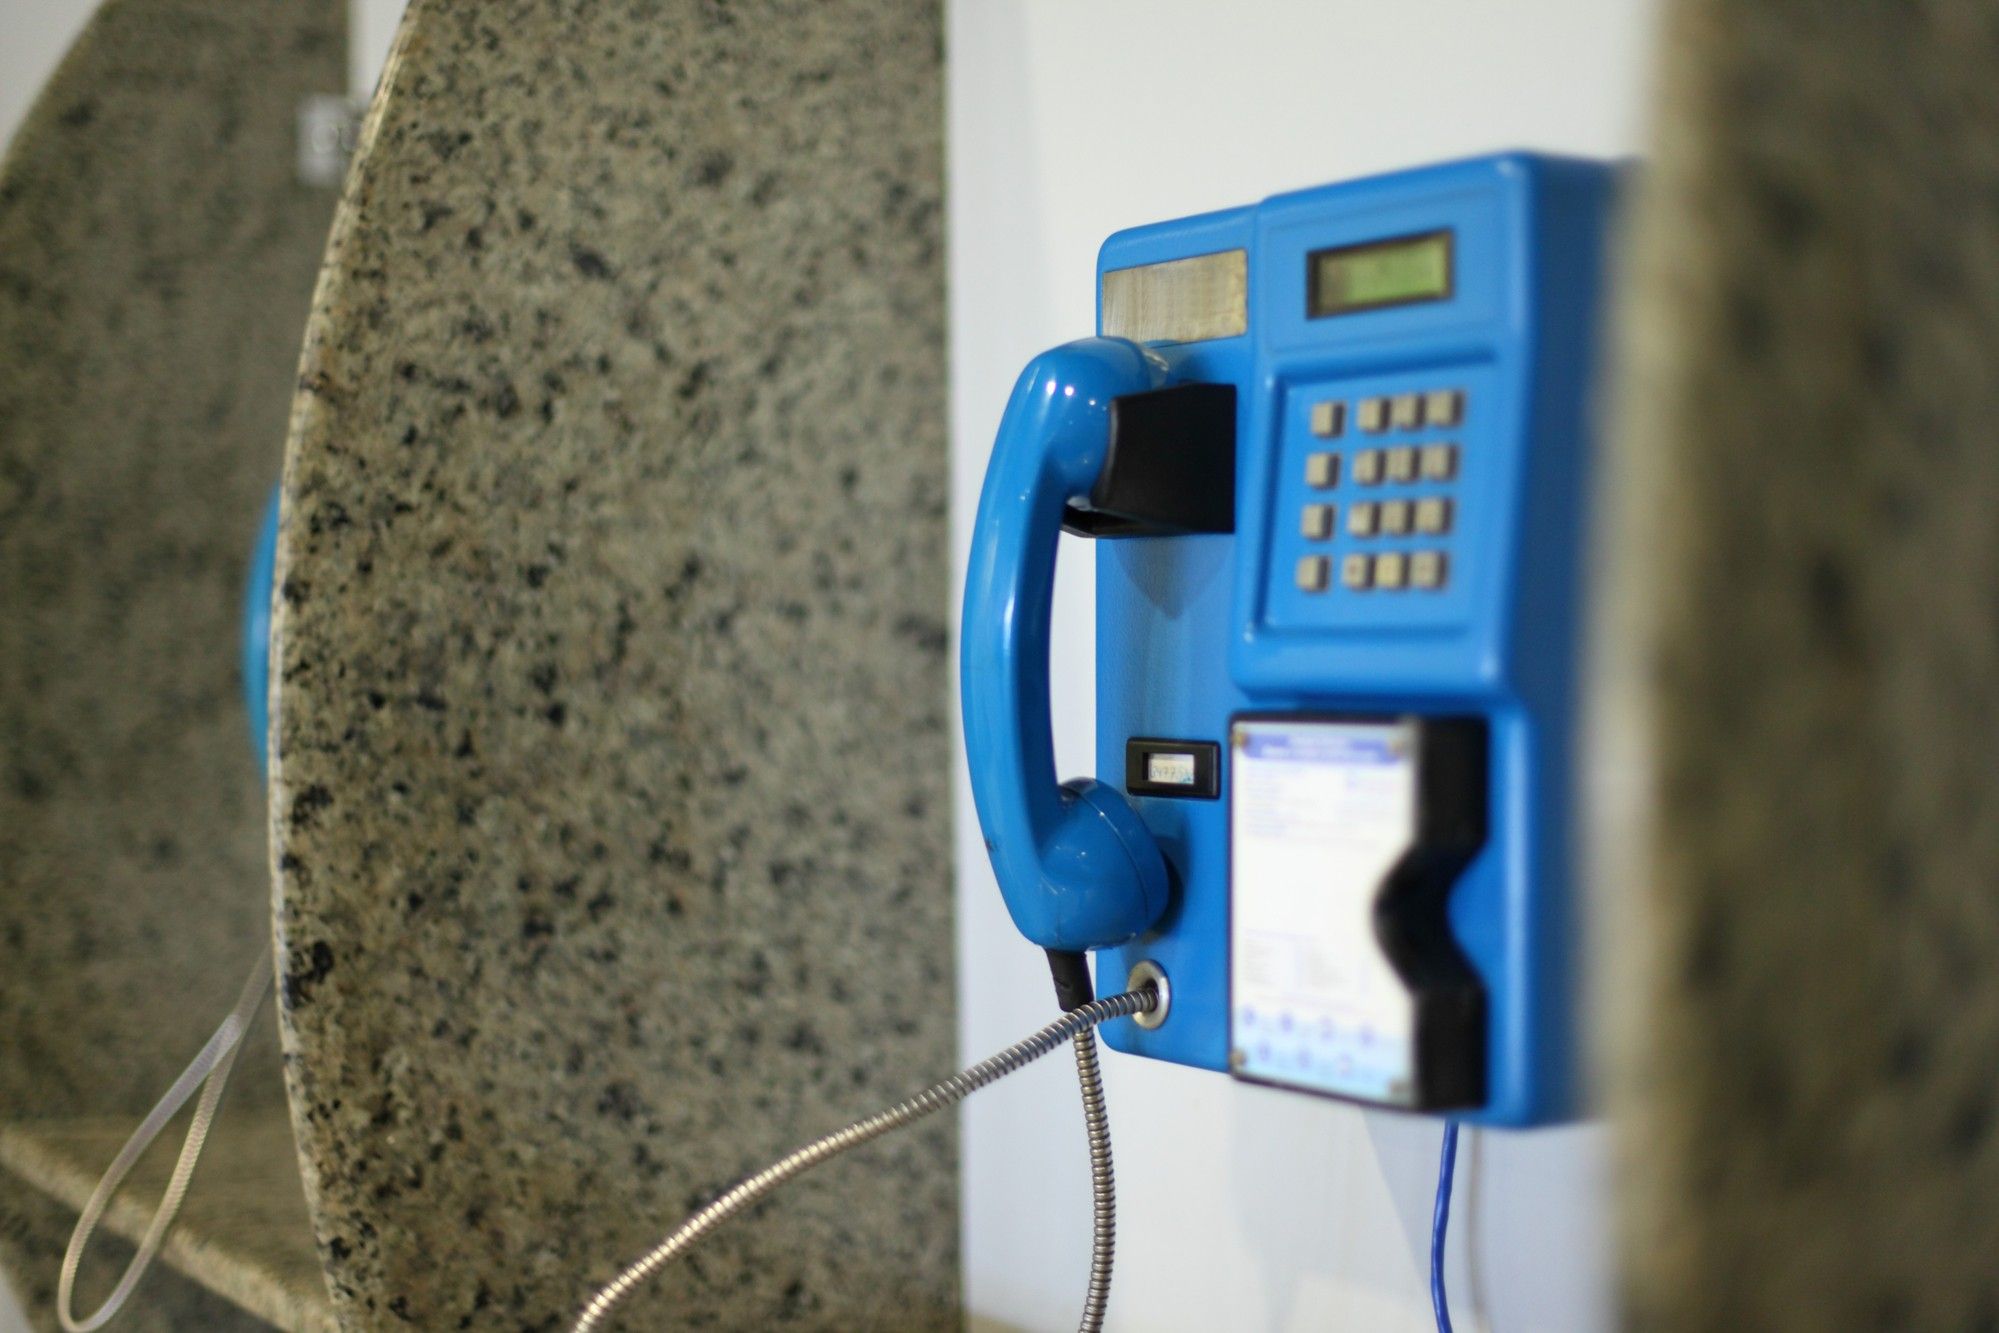 Inmate phone calls are the subject of a class action lawsuit.